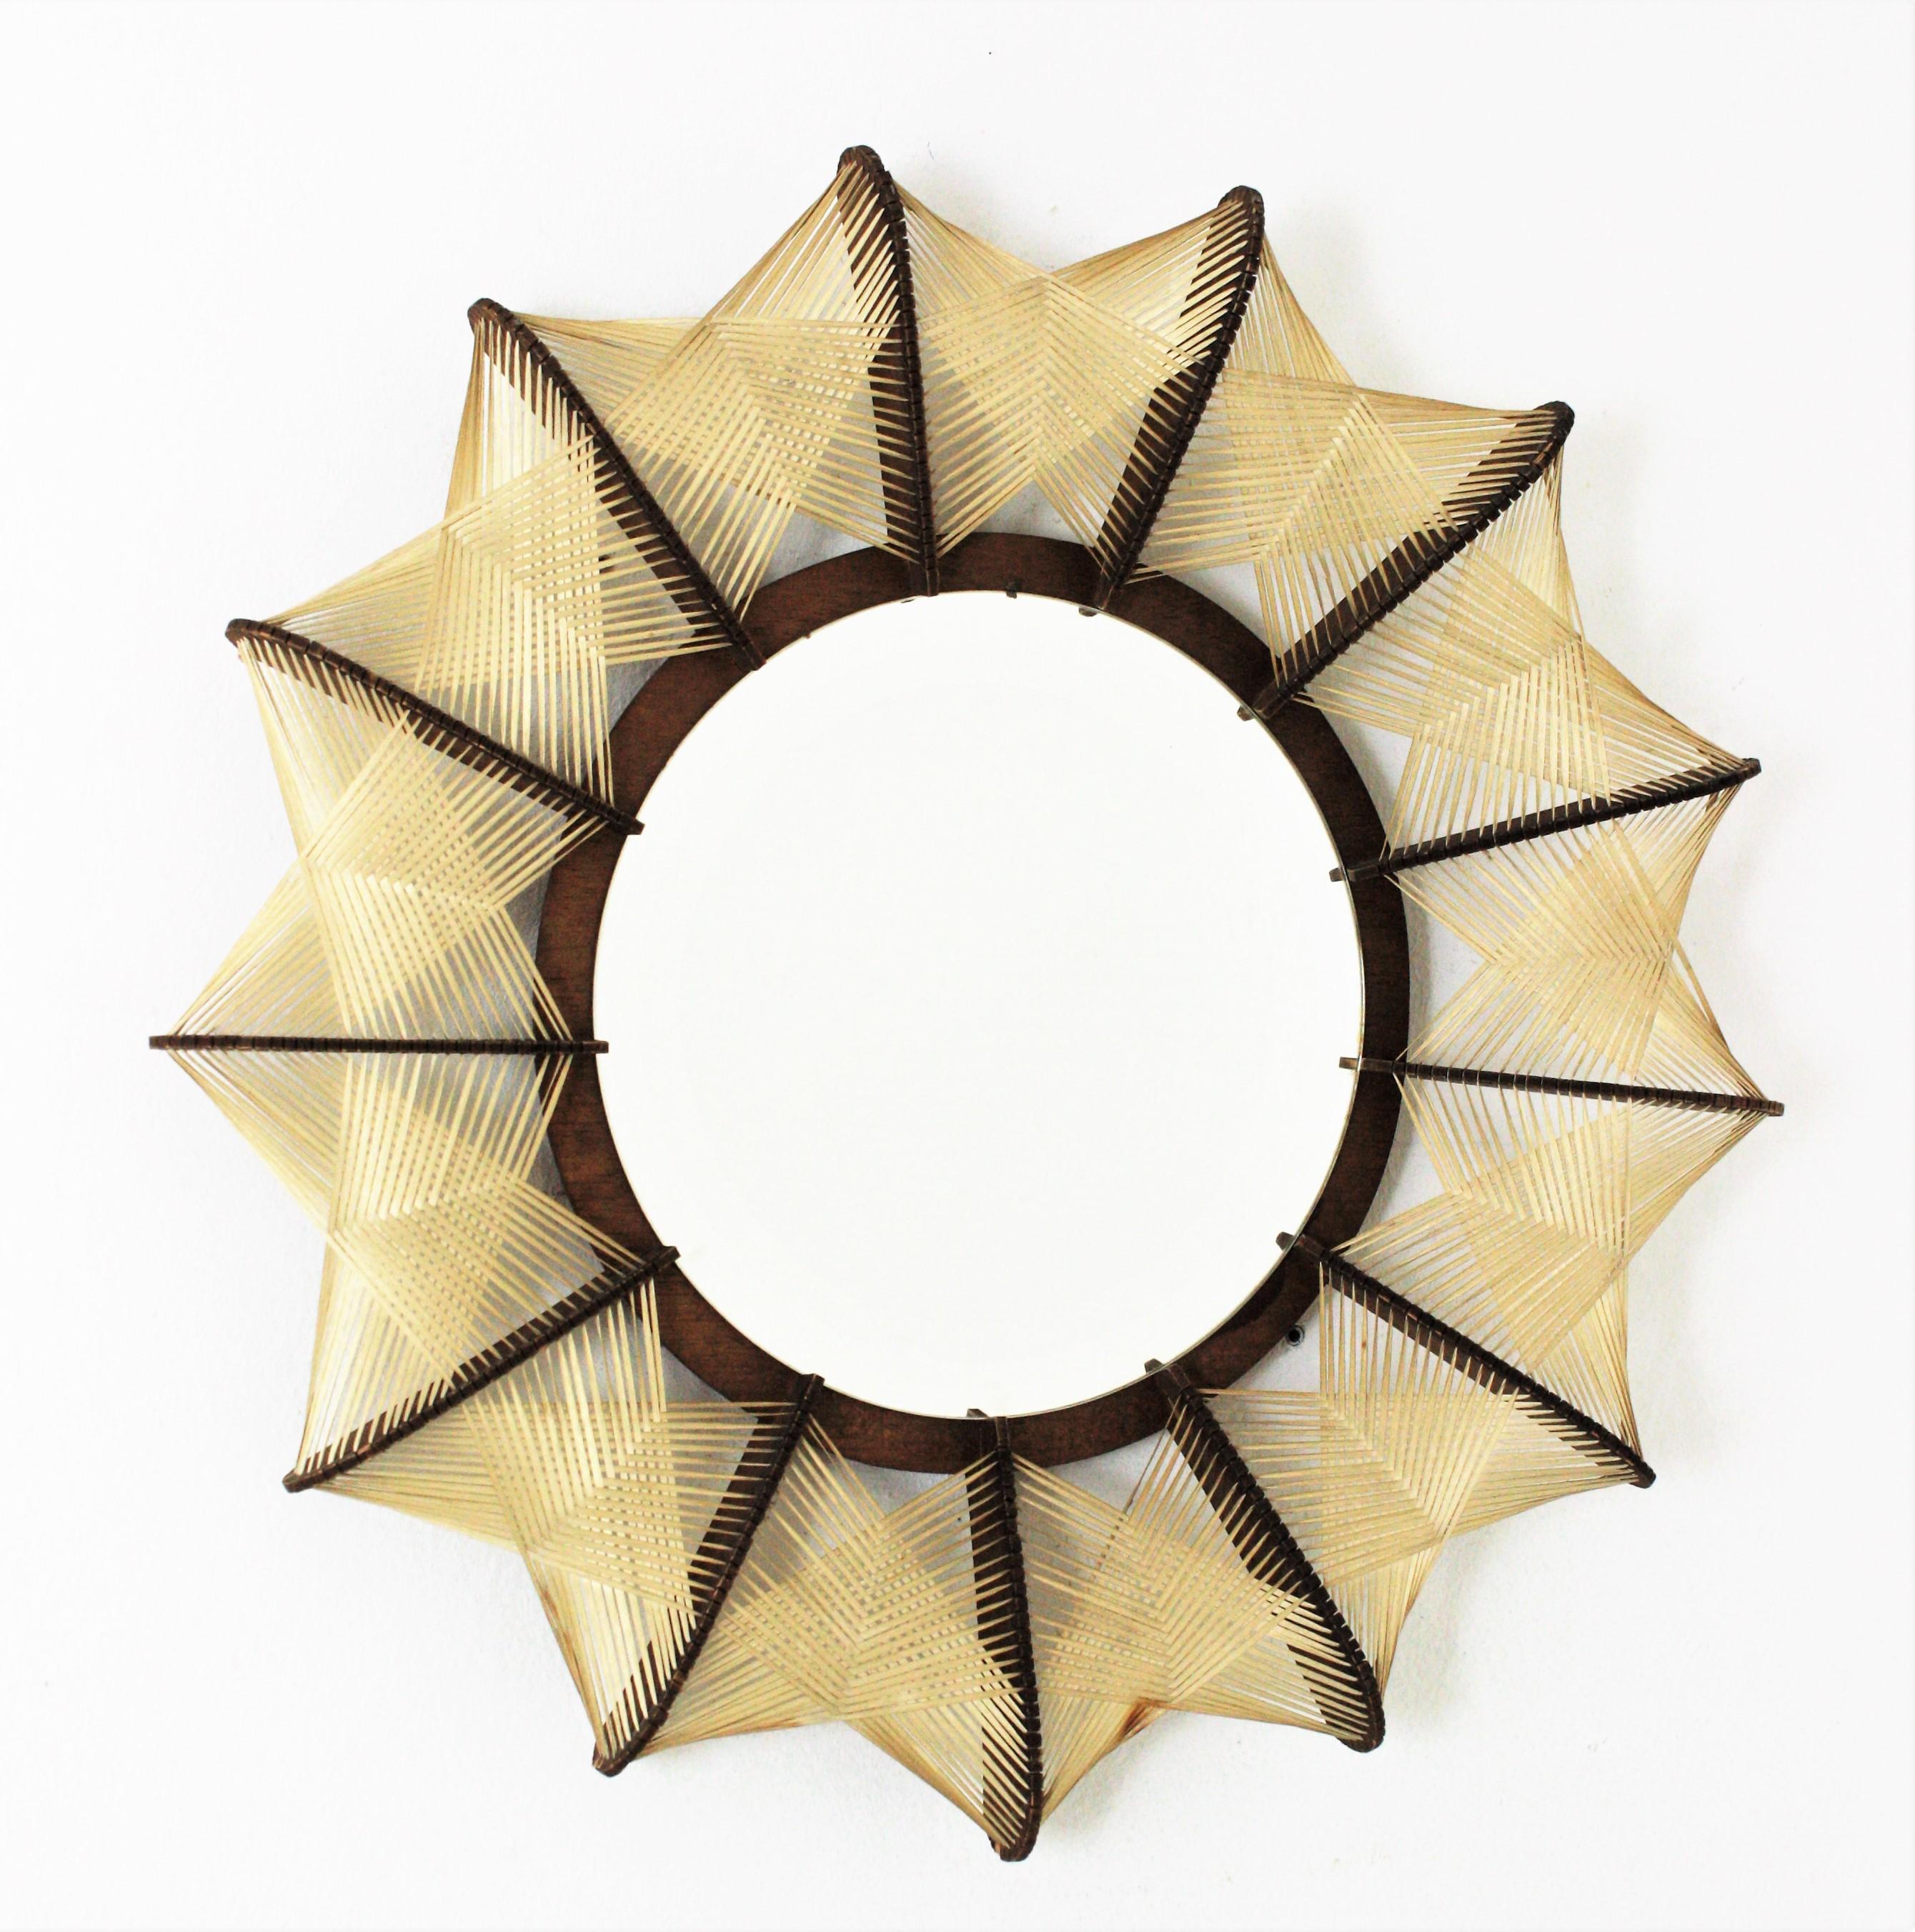 Scandinavian Modern handcrafted wood mirror with braided wicker frame, France, 1960s.
This circular mirror, handcrafted in the Mid-20th century period has Scandinavian design accents. Its sculptural handwoven work at the frame marks the difference.